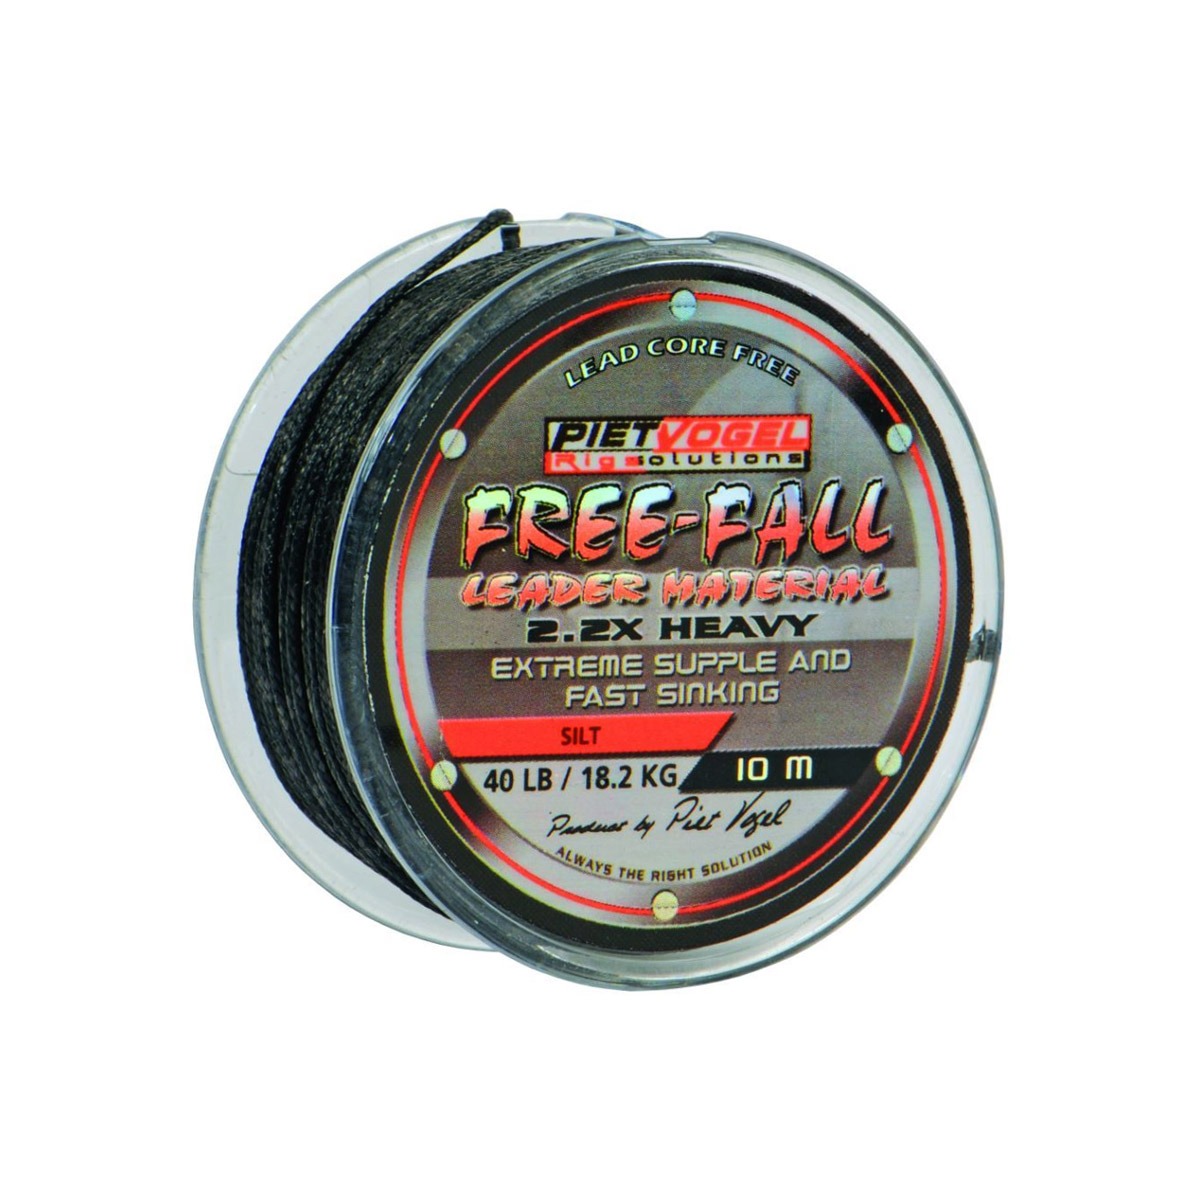 Rig Solutions Free Fall Leader Material Silt -  40 lbs -  80 lbs 